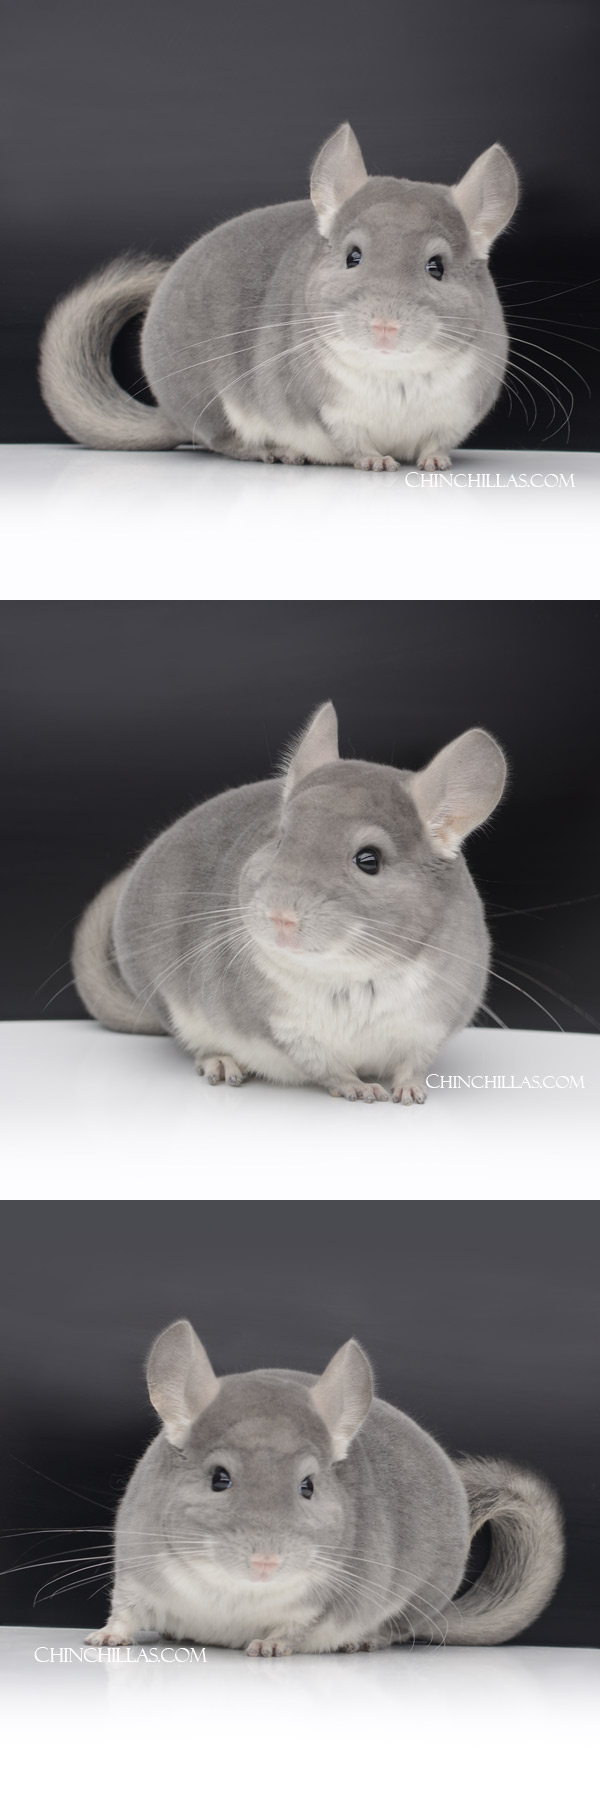 Chinchilla or related item offered for sale or export on Chinchillas.com - 000031 Show Quality Violet (Sapphire Carrier) Male Chinchilla